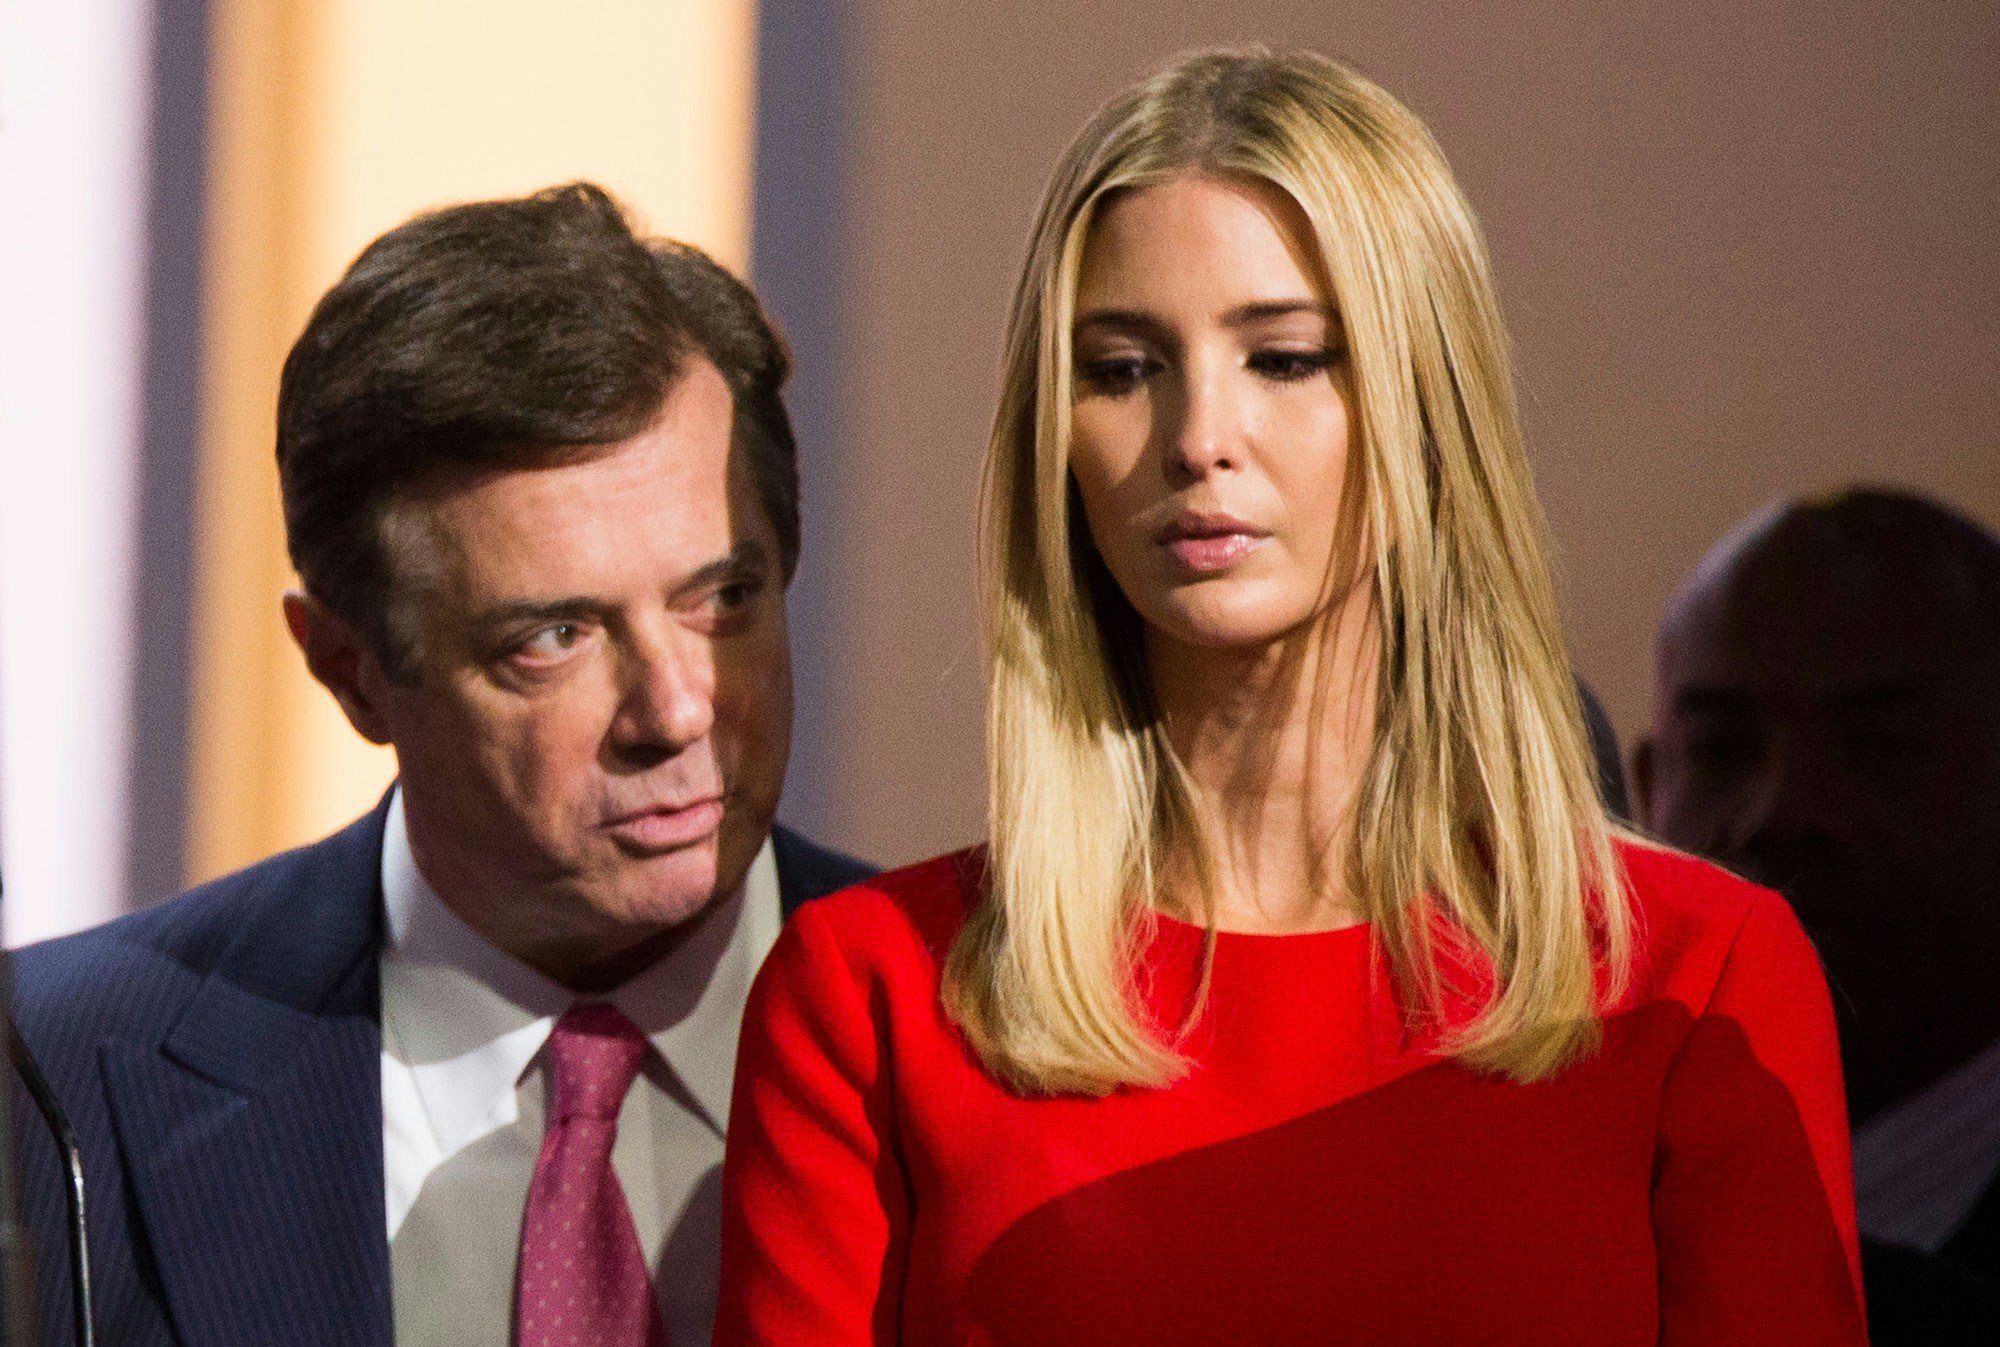 CLEVELAND, OH - JULY 21:  Trump campaign chairman Paul Manafort speaks to Ivanka Trump, daughter of Republican nominee Donald Trump at the Republican Convention, July 21, 2016 at the Quicken Loans Arena in Cleveland, Ohio. (Photo by Brooks Kraft/ Getty Images)